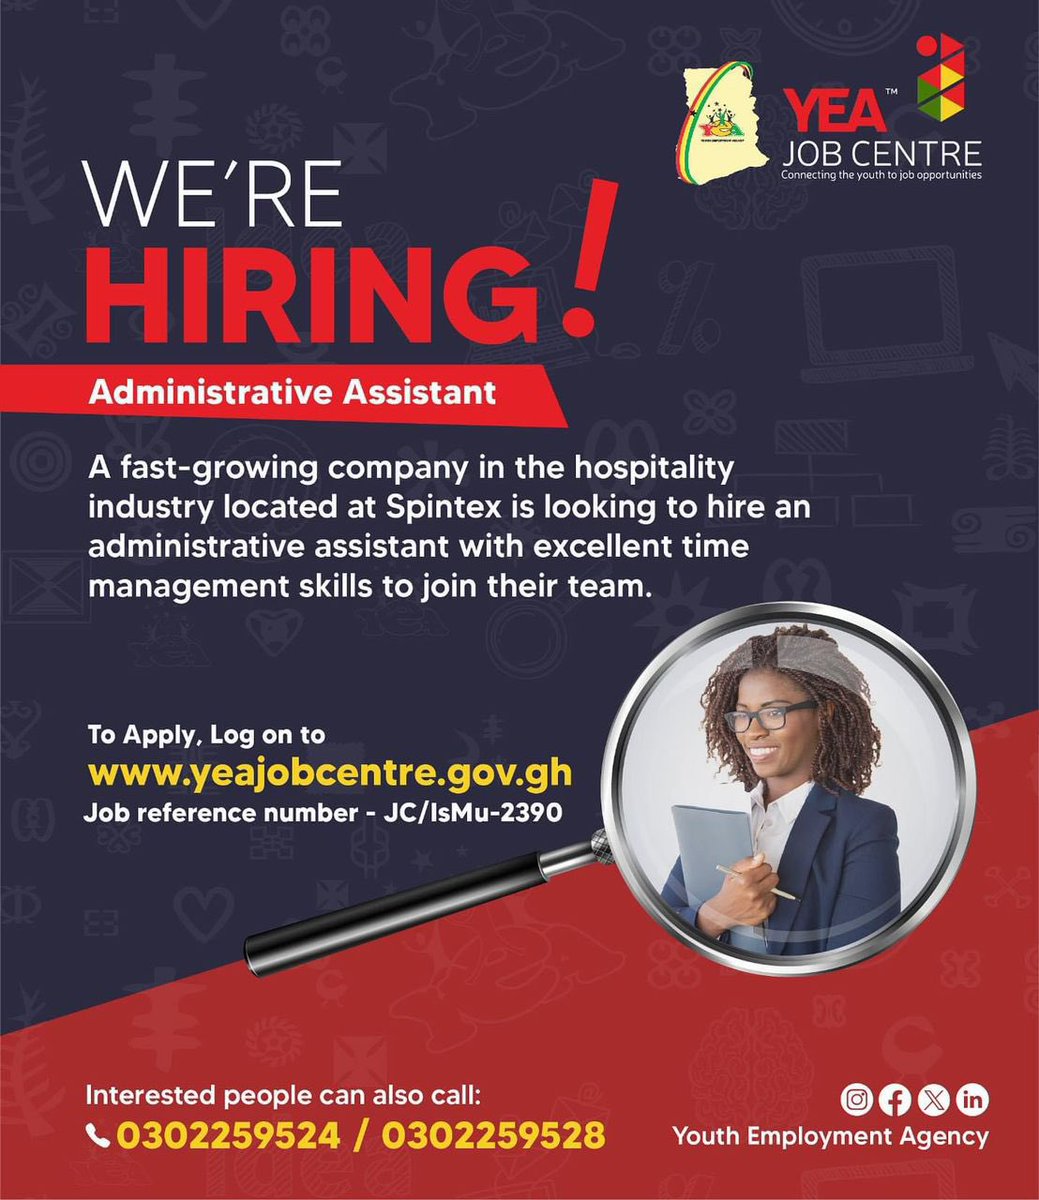 🇬🇭AGENDA FOR JOBS🇬🇭

CHECK THE NEW & AVAILABLE JOBS AND APPLY NOW!!!

#jobsearch 
#recruitments 
#yeajobcentre 
#yea
#viral